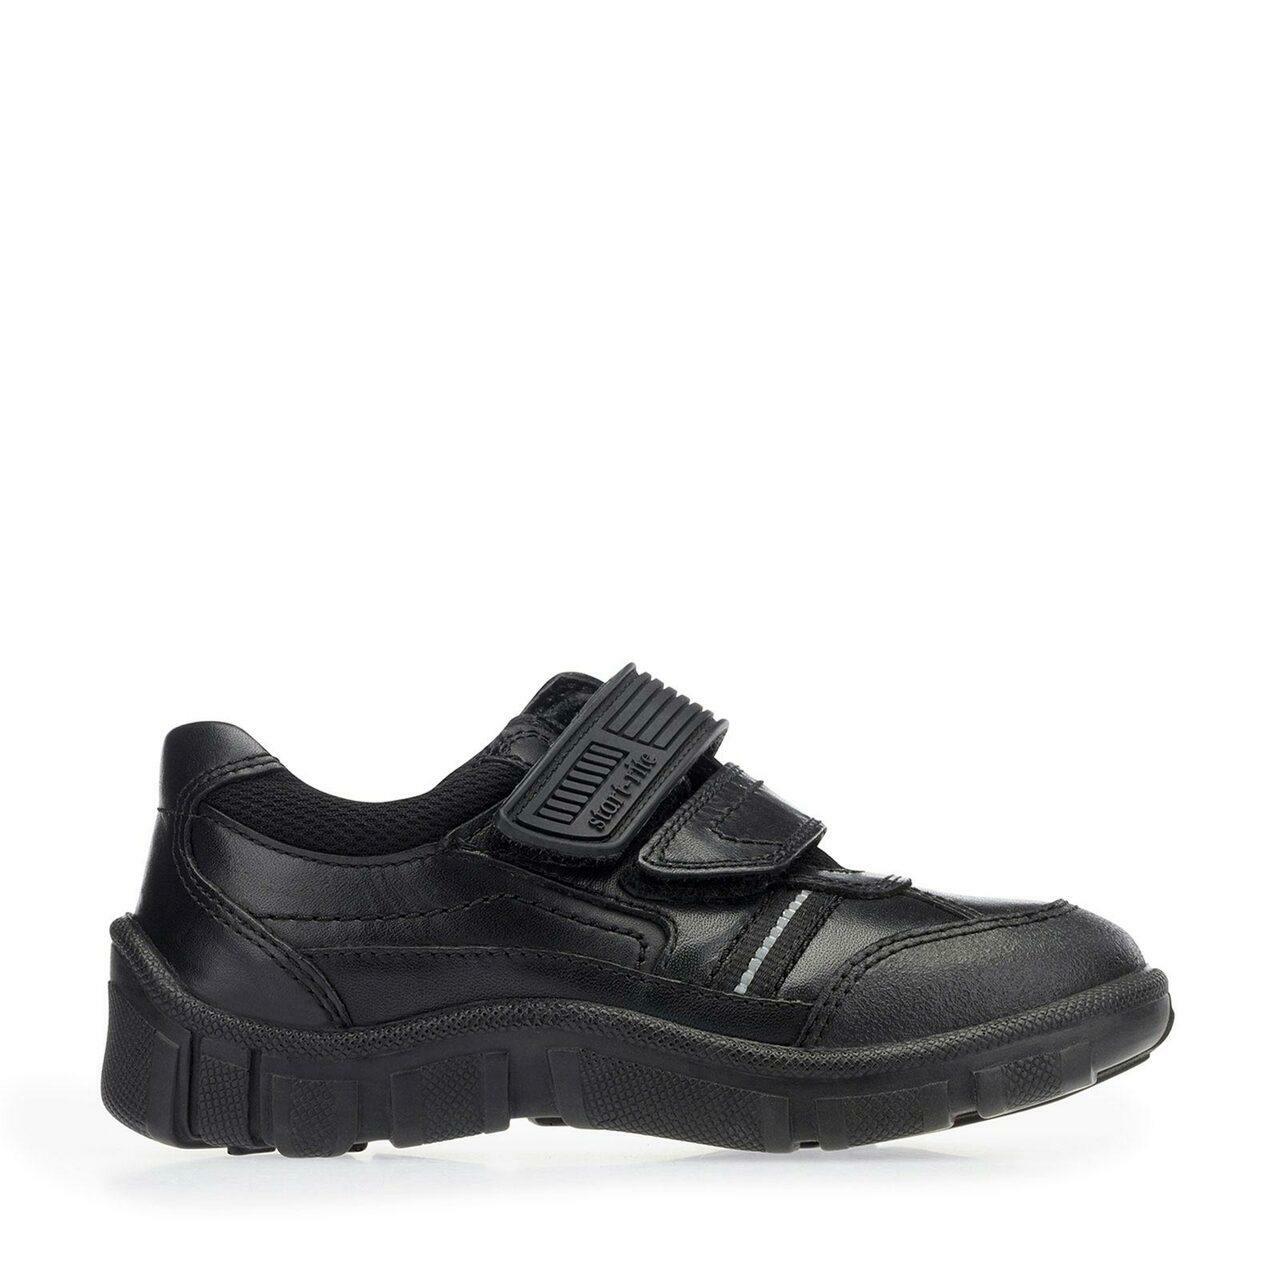 A boys school shoe by Start Rite,style Luke, in black leather with double velcro fastening. Right side view.